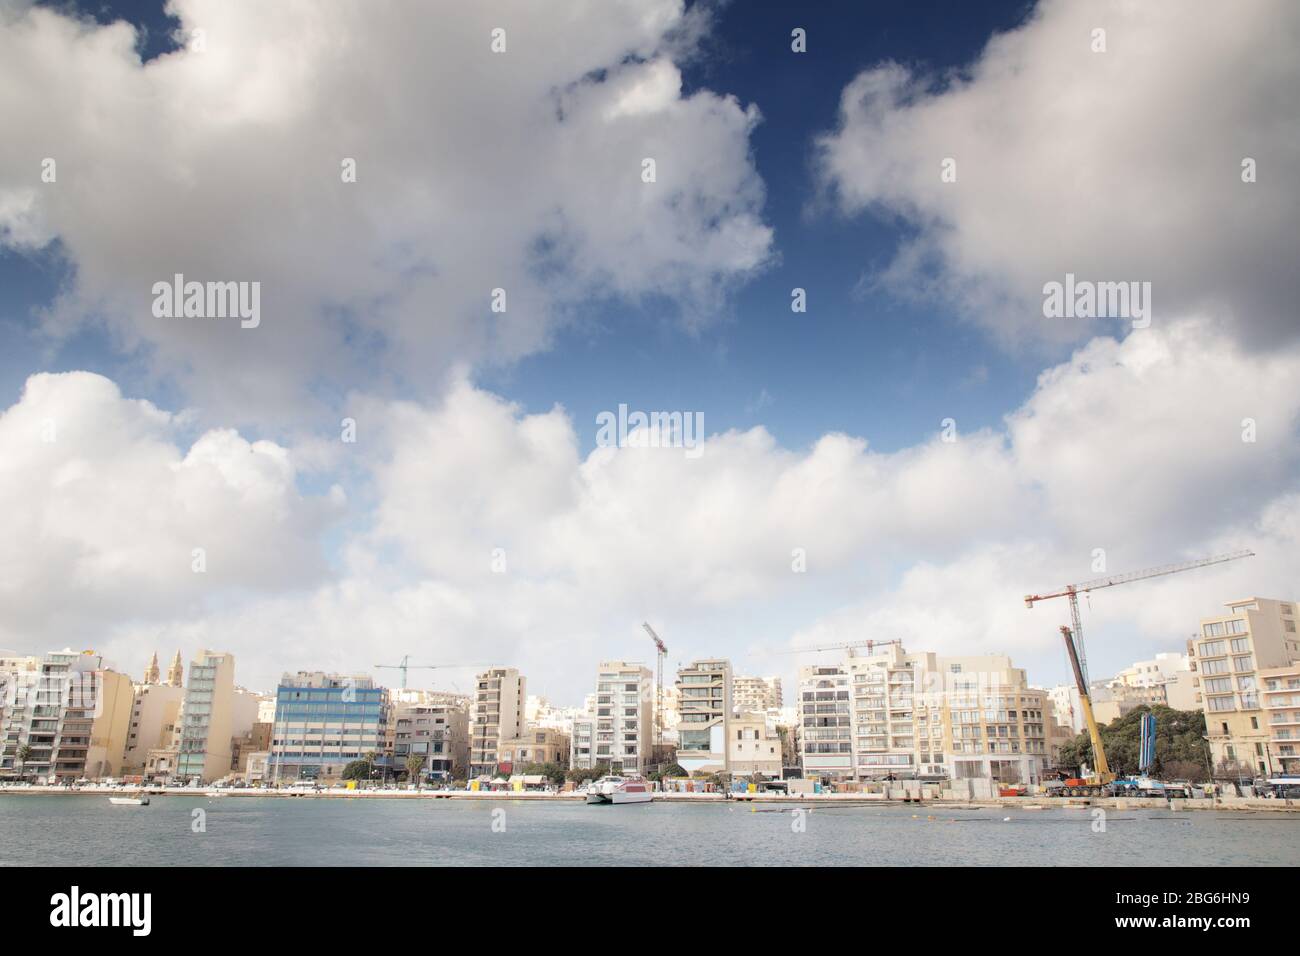 seafront along the coast of Sliema in malta with a lot of building work being done Stock Photo